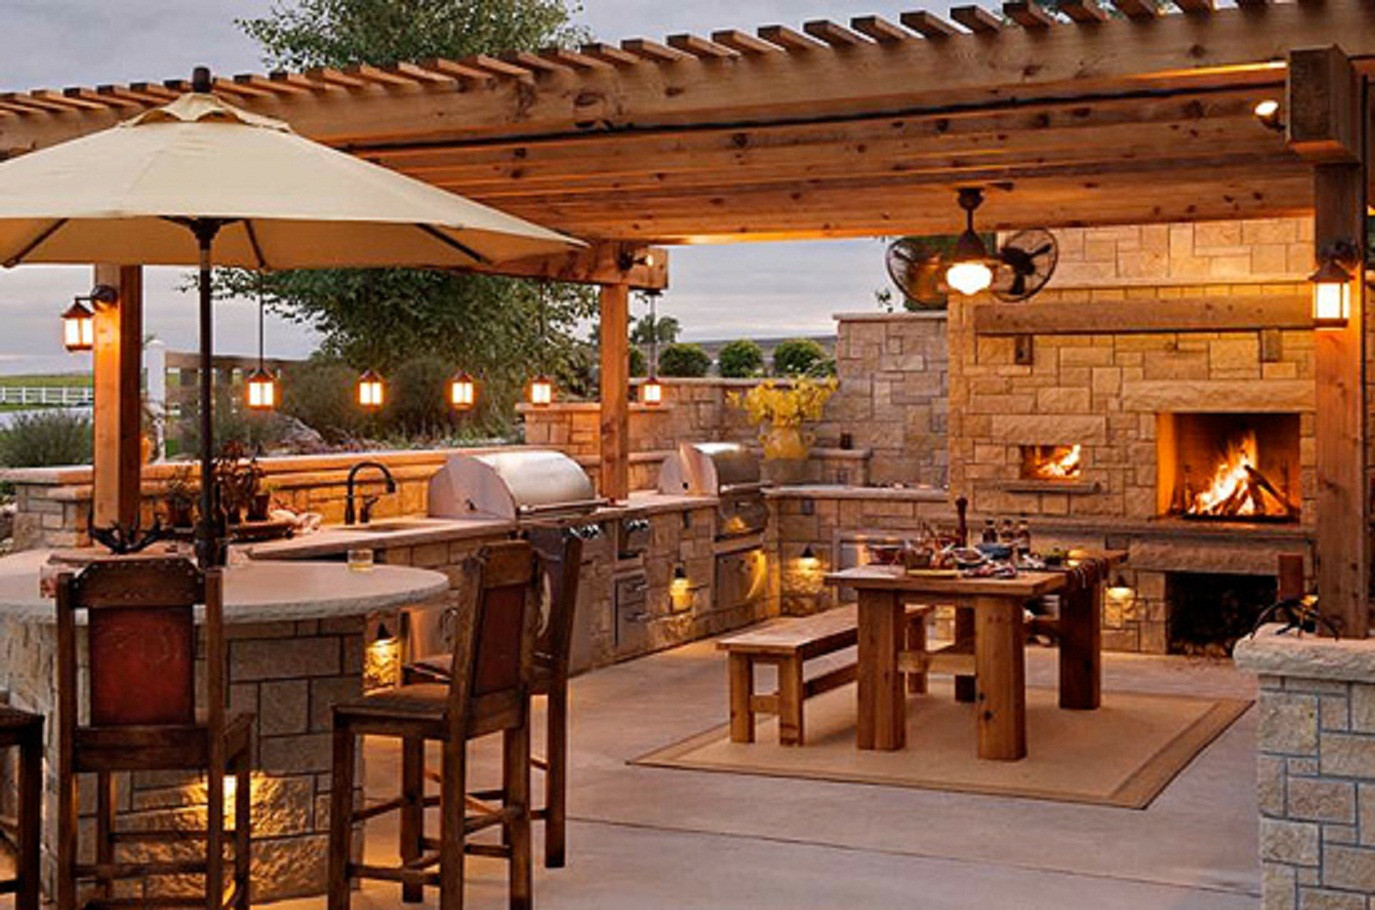 Simple Outdoor Kitchen Ideas
 How to Design Your Perfect Outdoor kitchen Outdoor